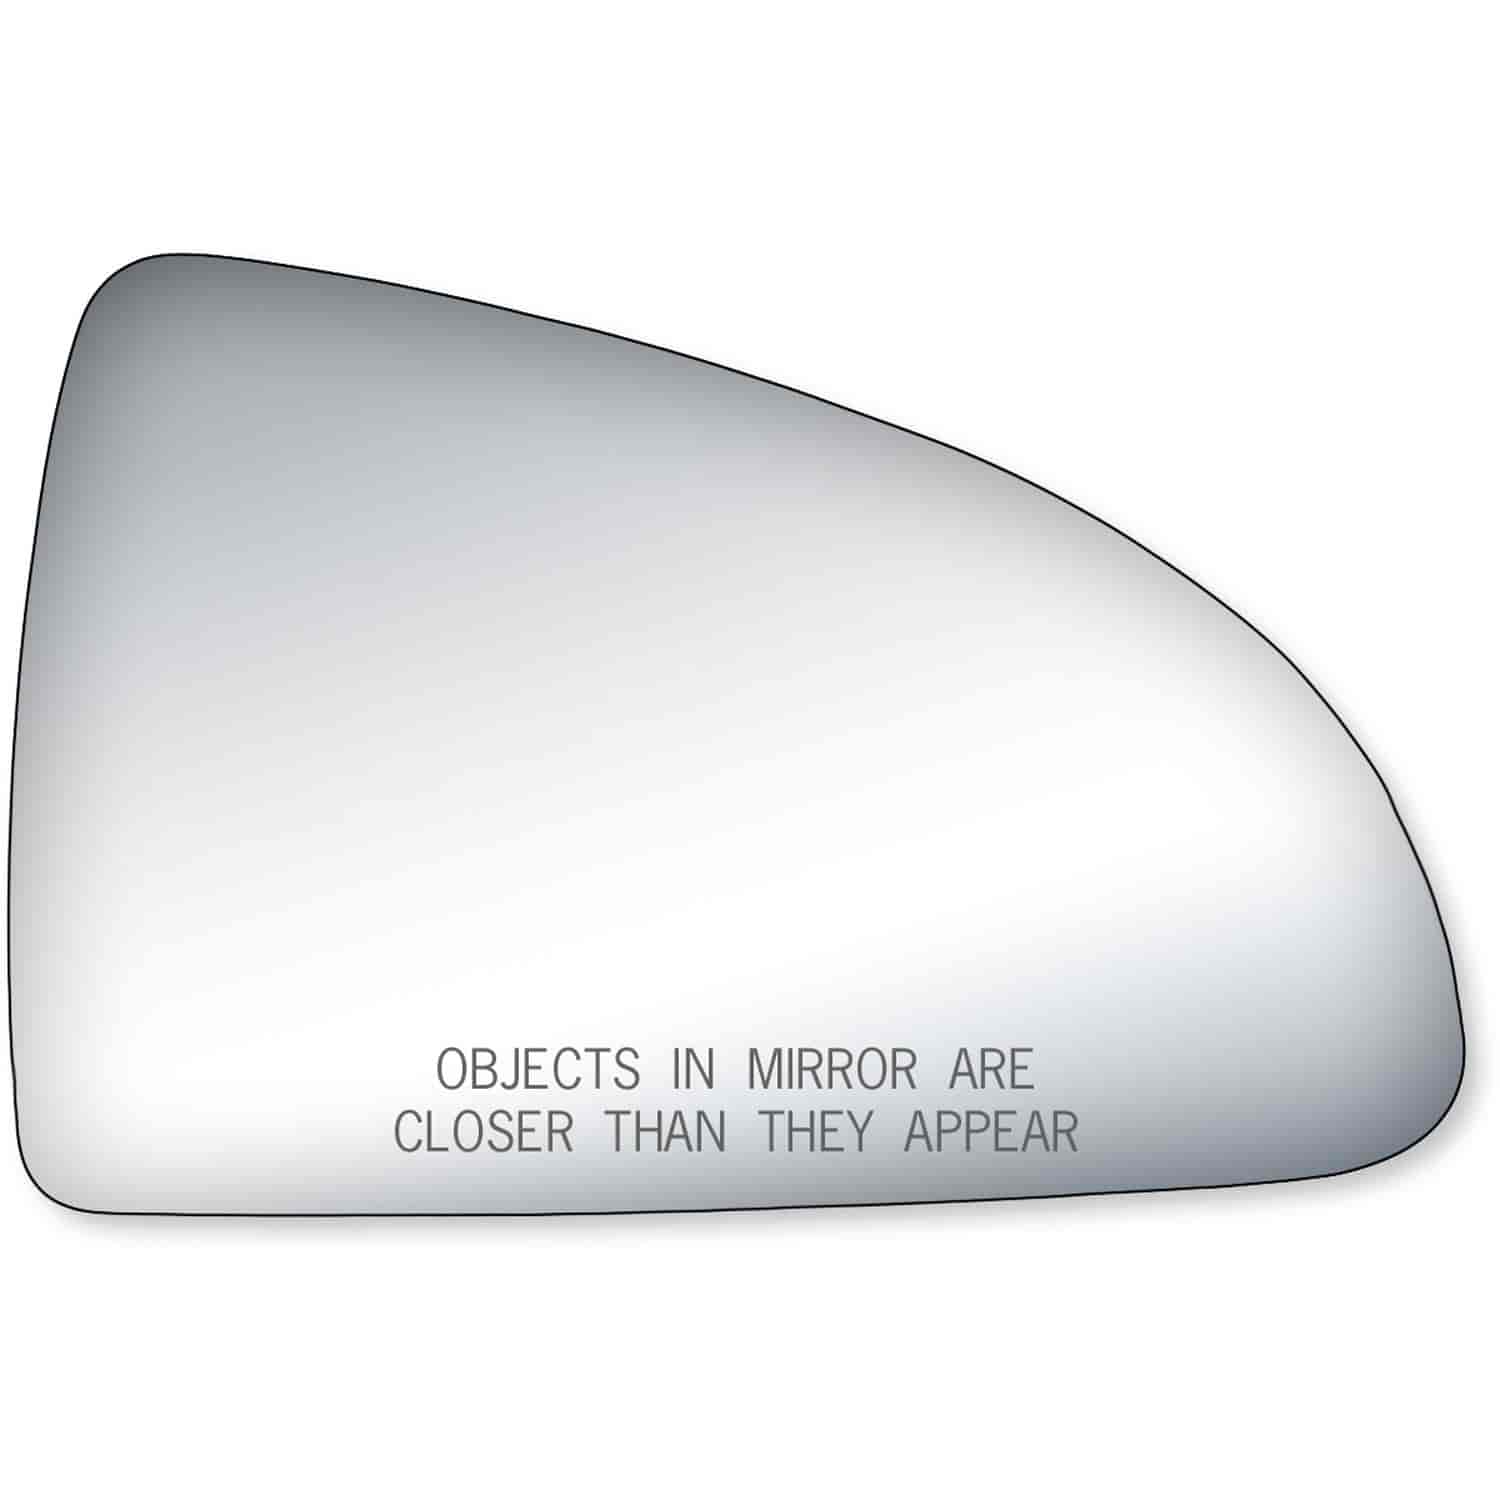 Replacement Glass for 04-08 Malibu Base/ LS/ LT; 05-10 G6 Coupe/ Sedan the glass measures 4 3/4 tall